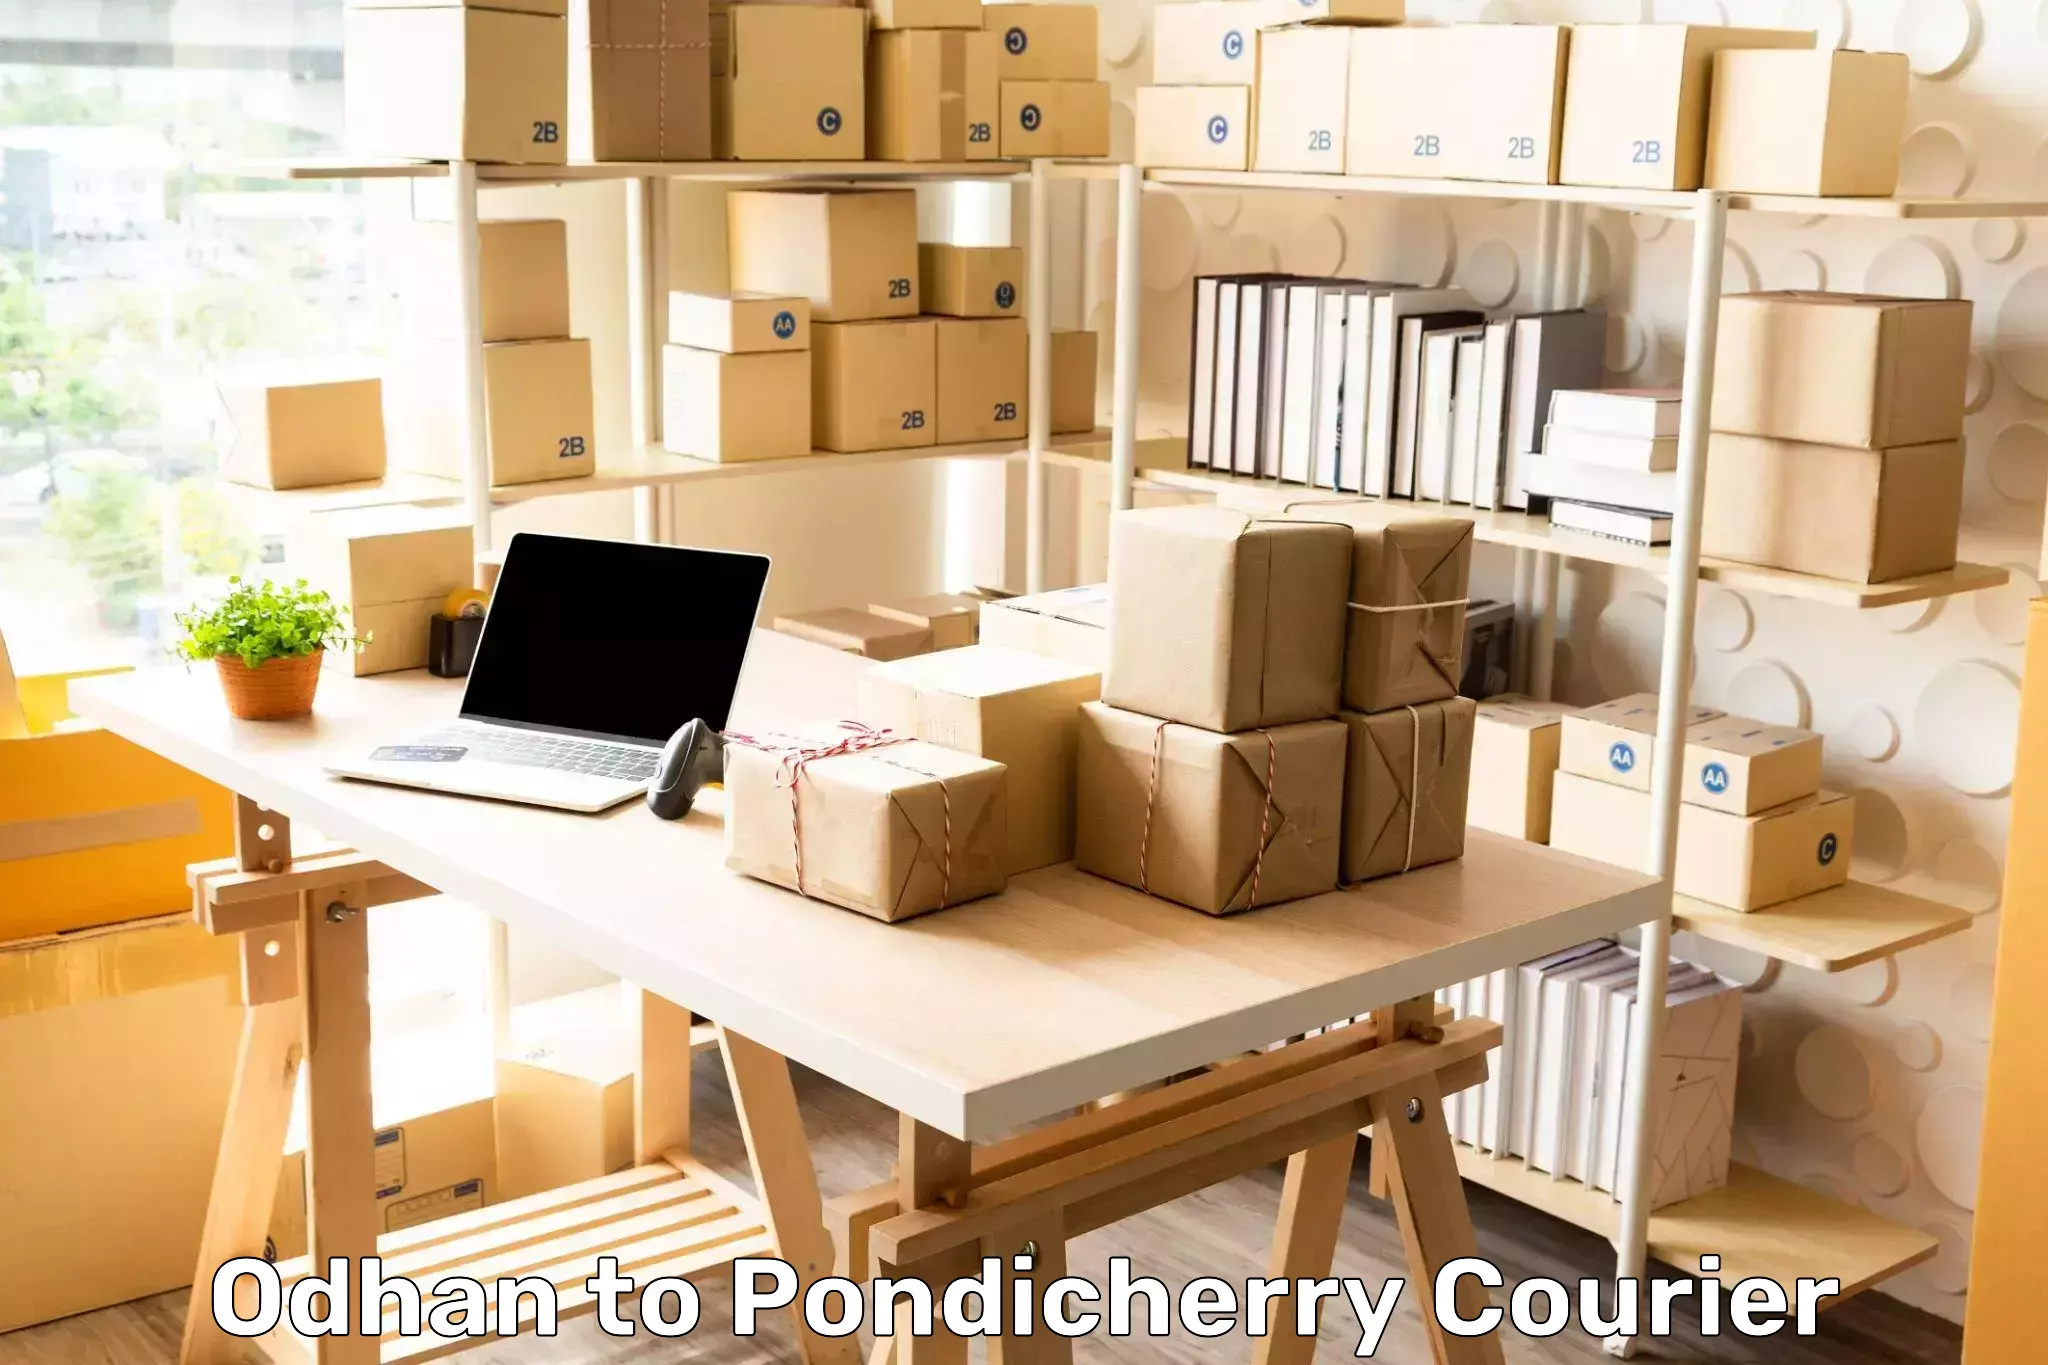 Return courier service Odhan to Pondicherry